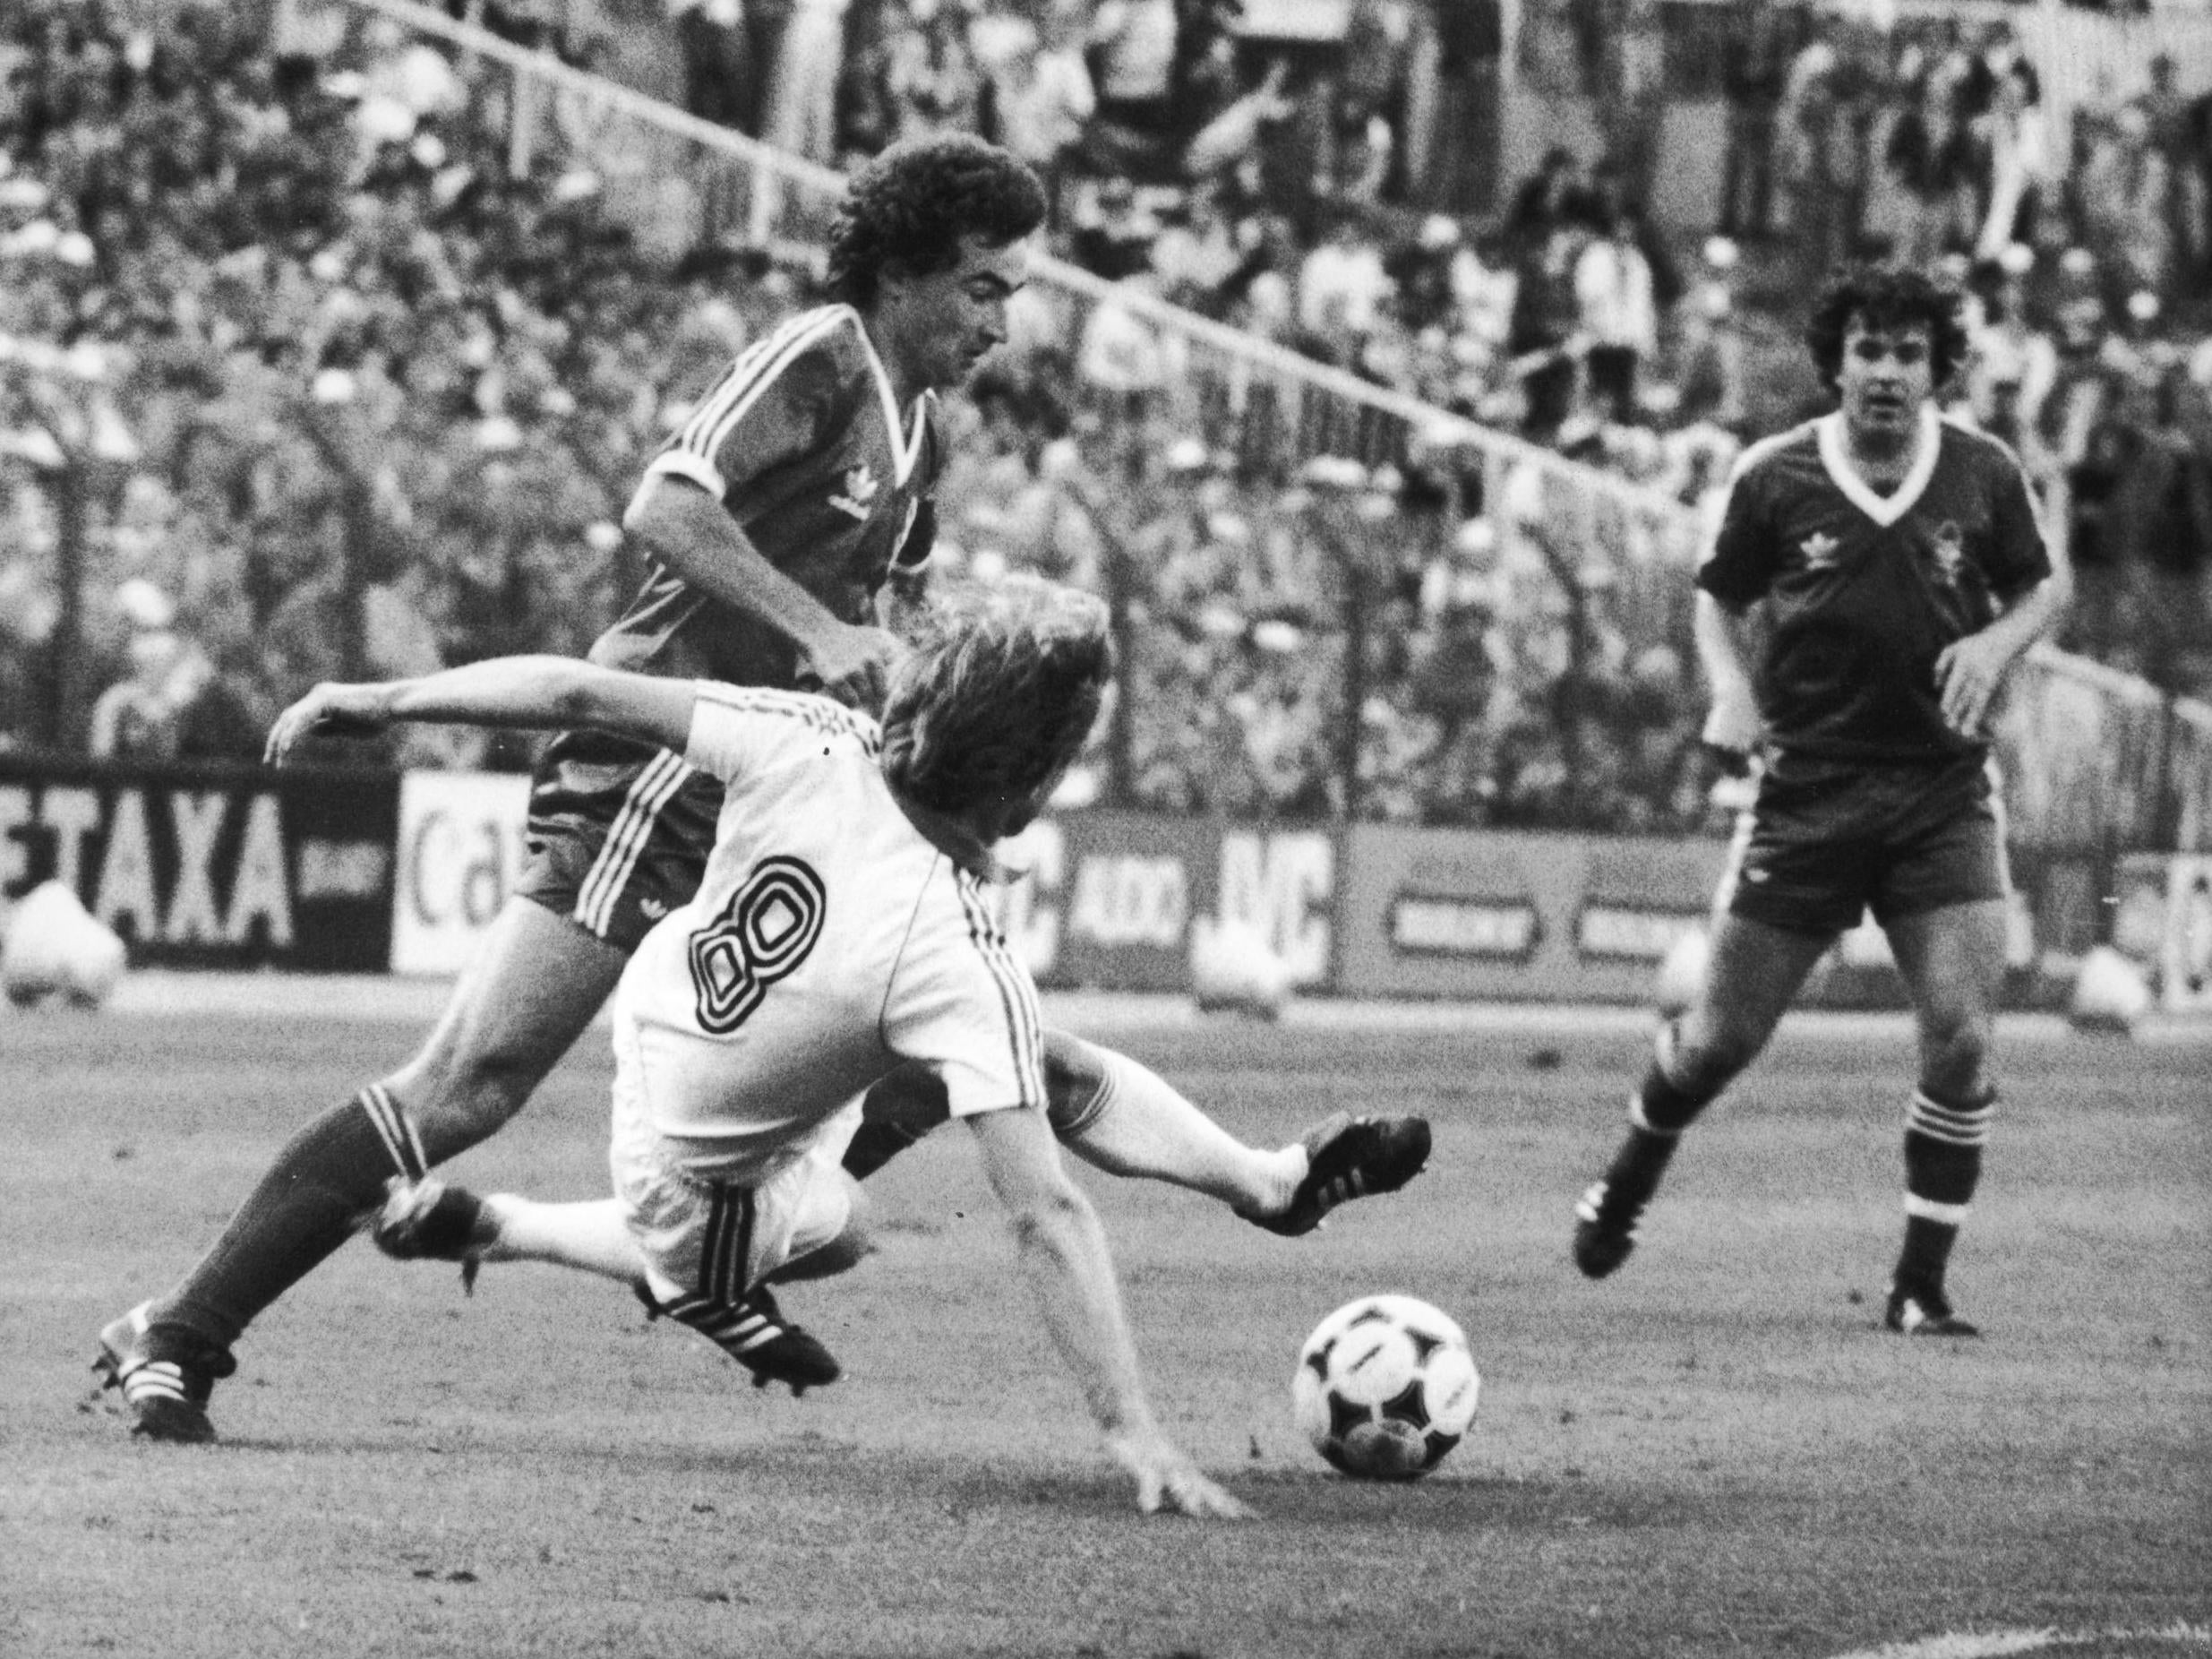 Martin O'Neill in action for Forest during the 1980 European Cup final